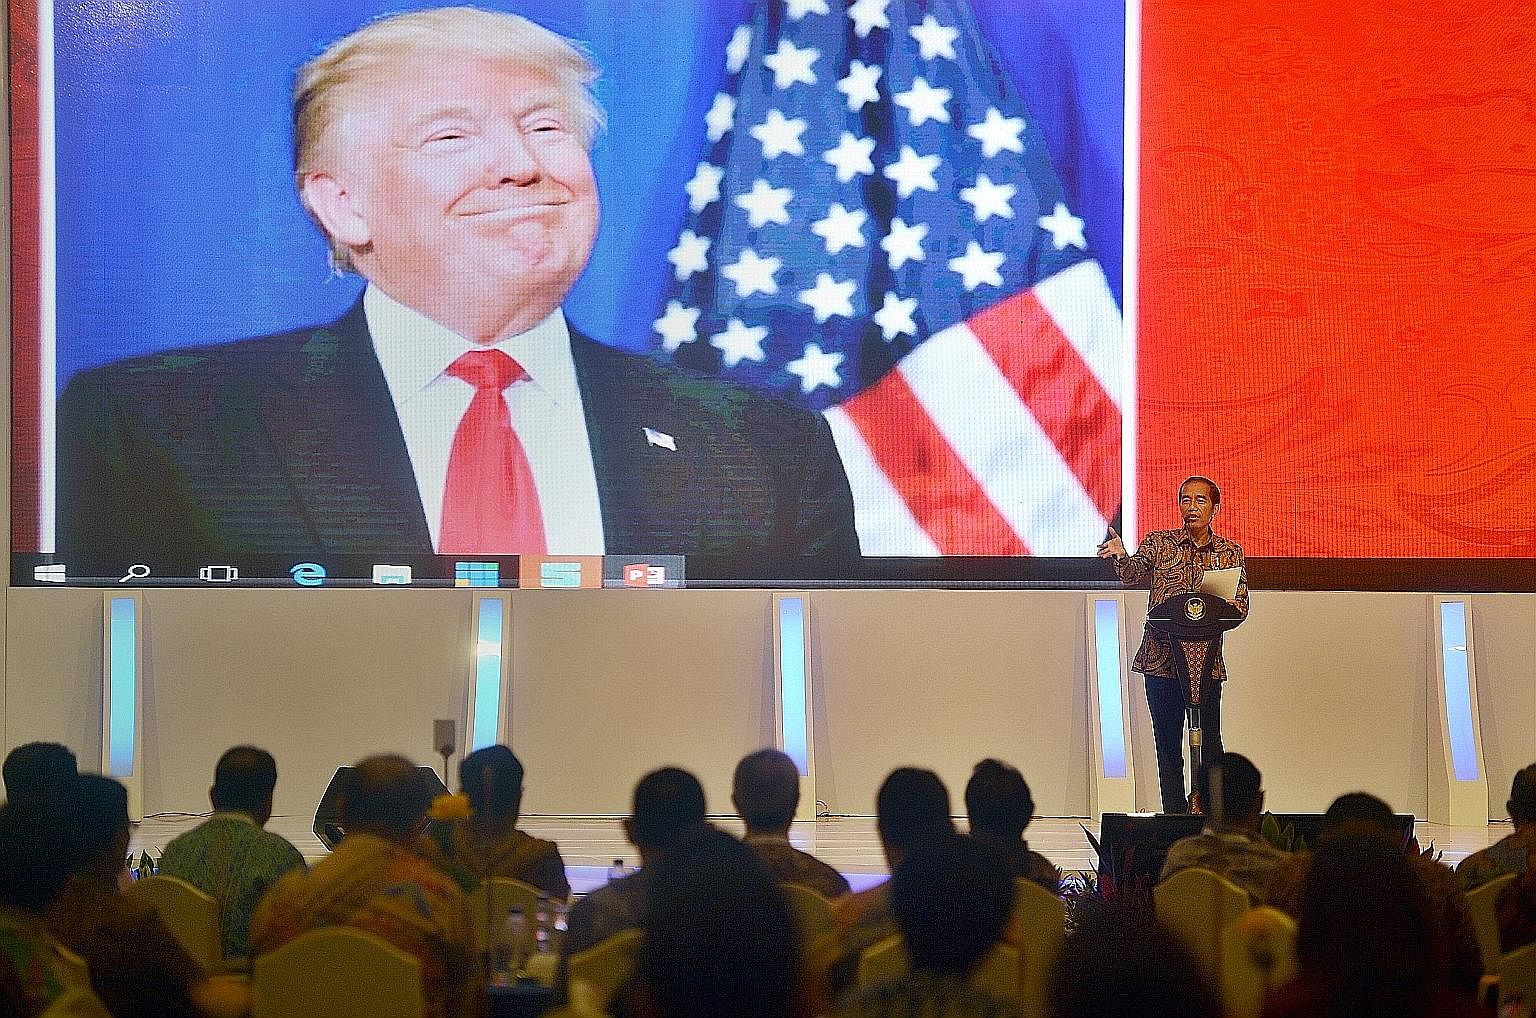 Indonesian President Joko speaking to local company executives as a picture of Mr Trump is shown on the screen behind him at the Kompas CEO forum in Jakarta last November. According to the writer, Mr Joko, like the incoming US president, is a product